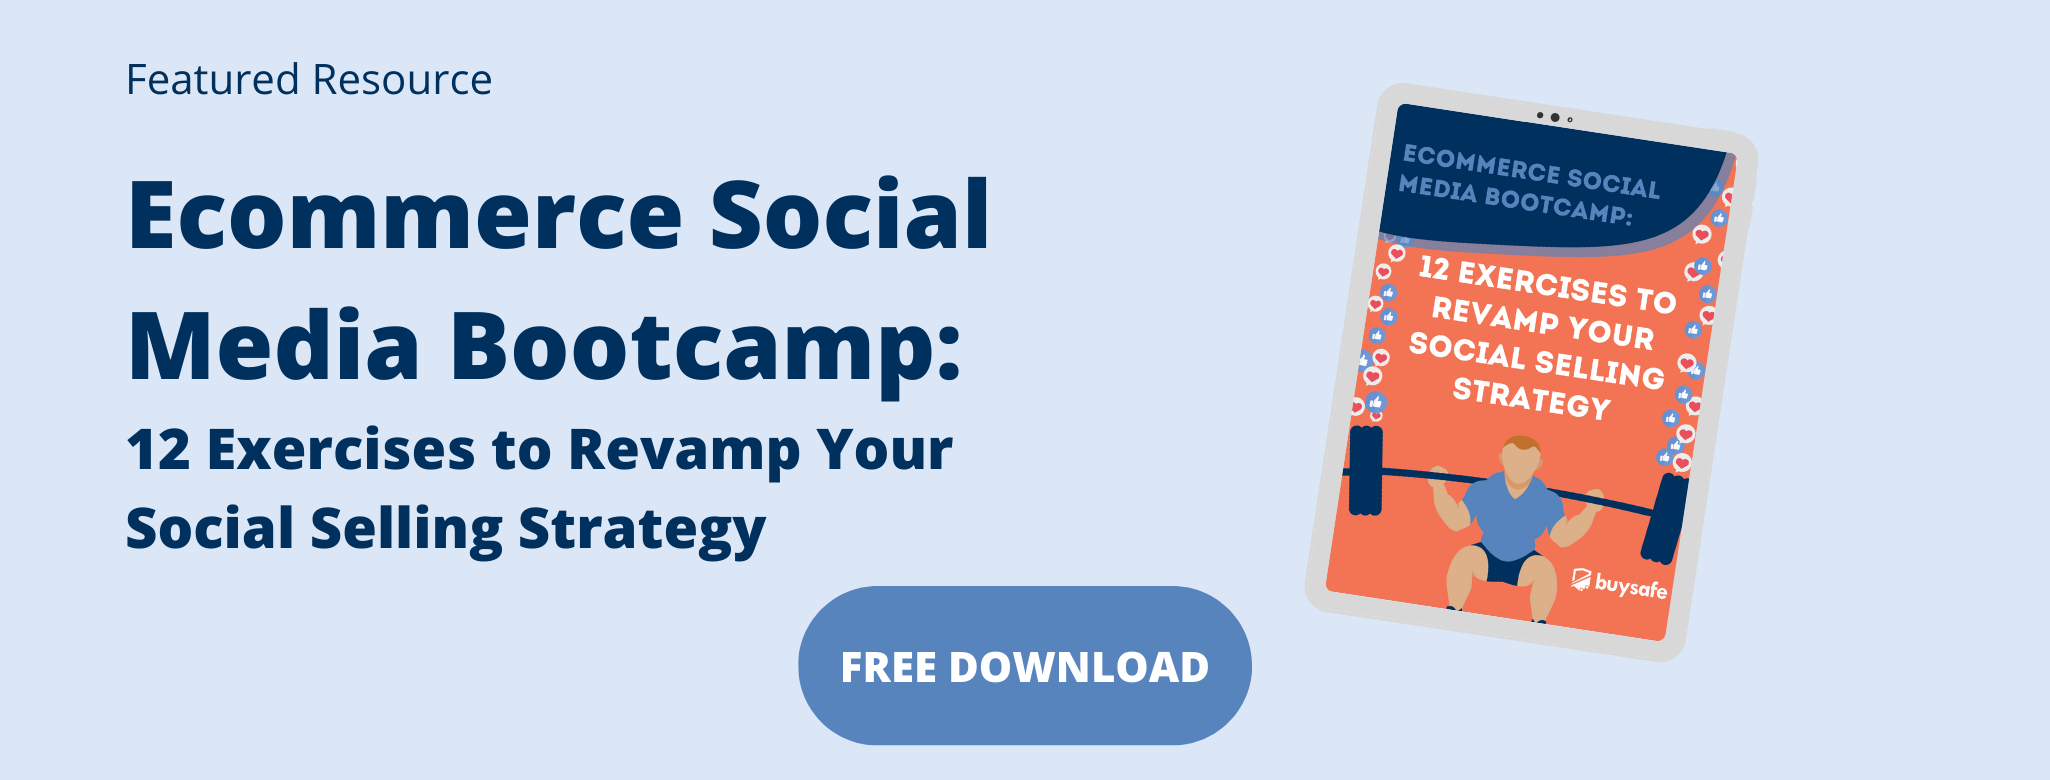 Featured resource: Ecommerce Social Media Bootcamp